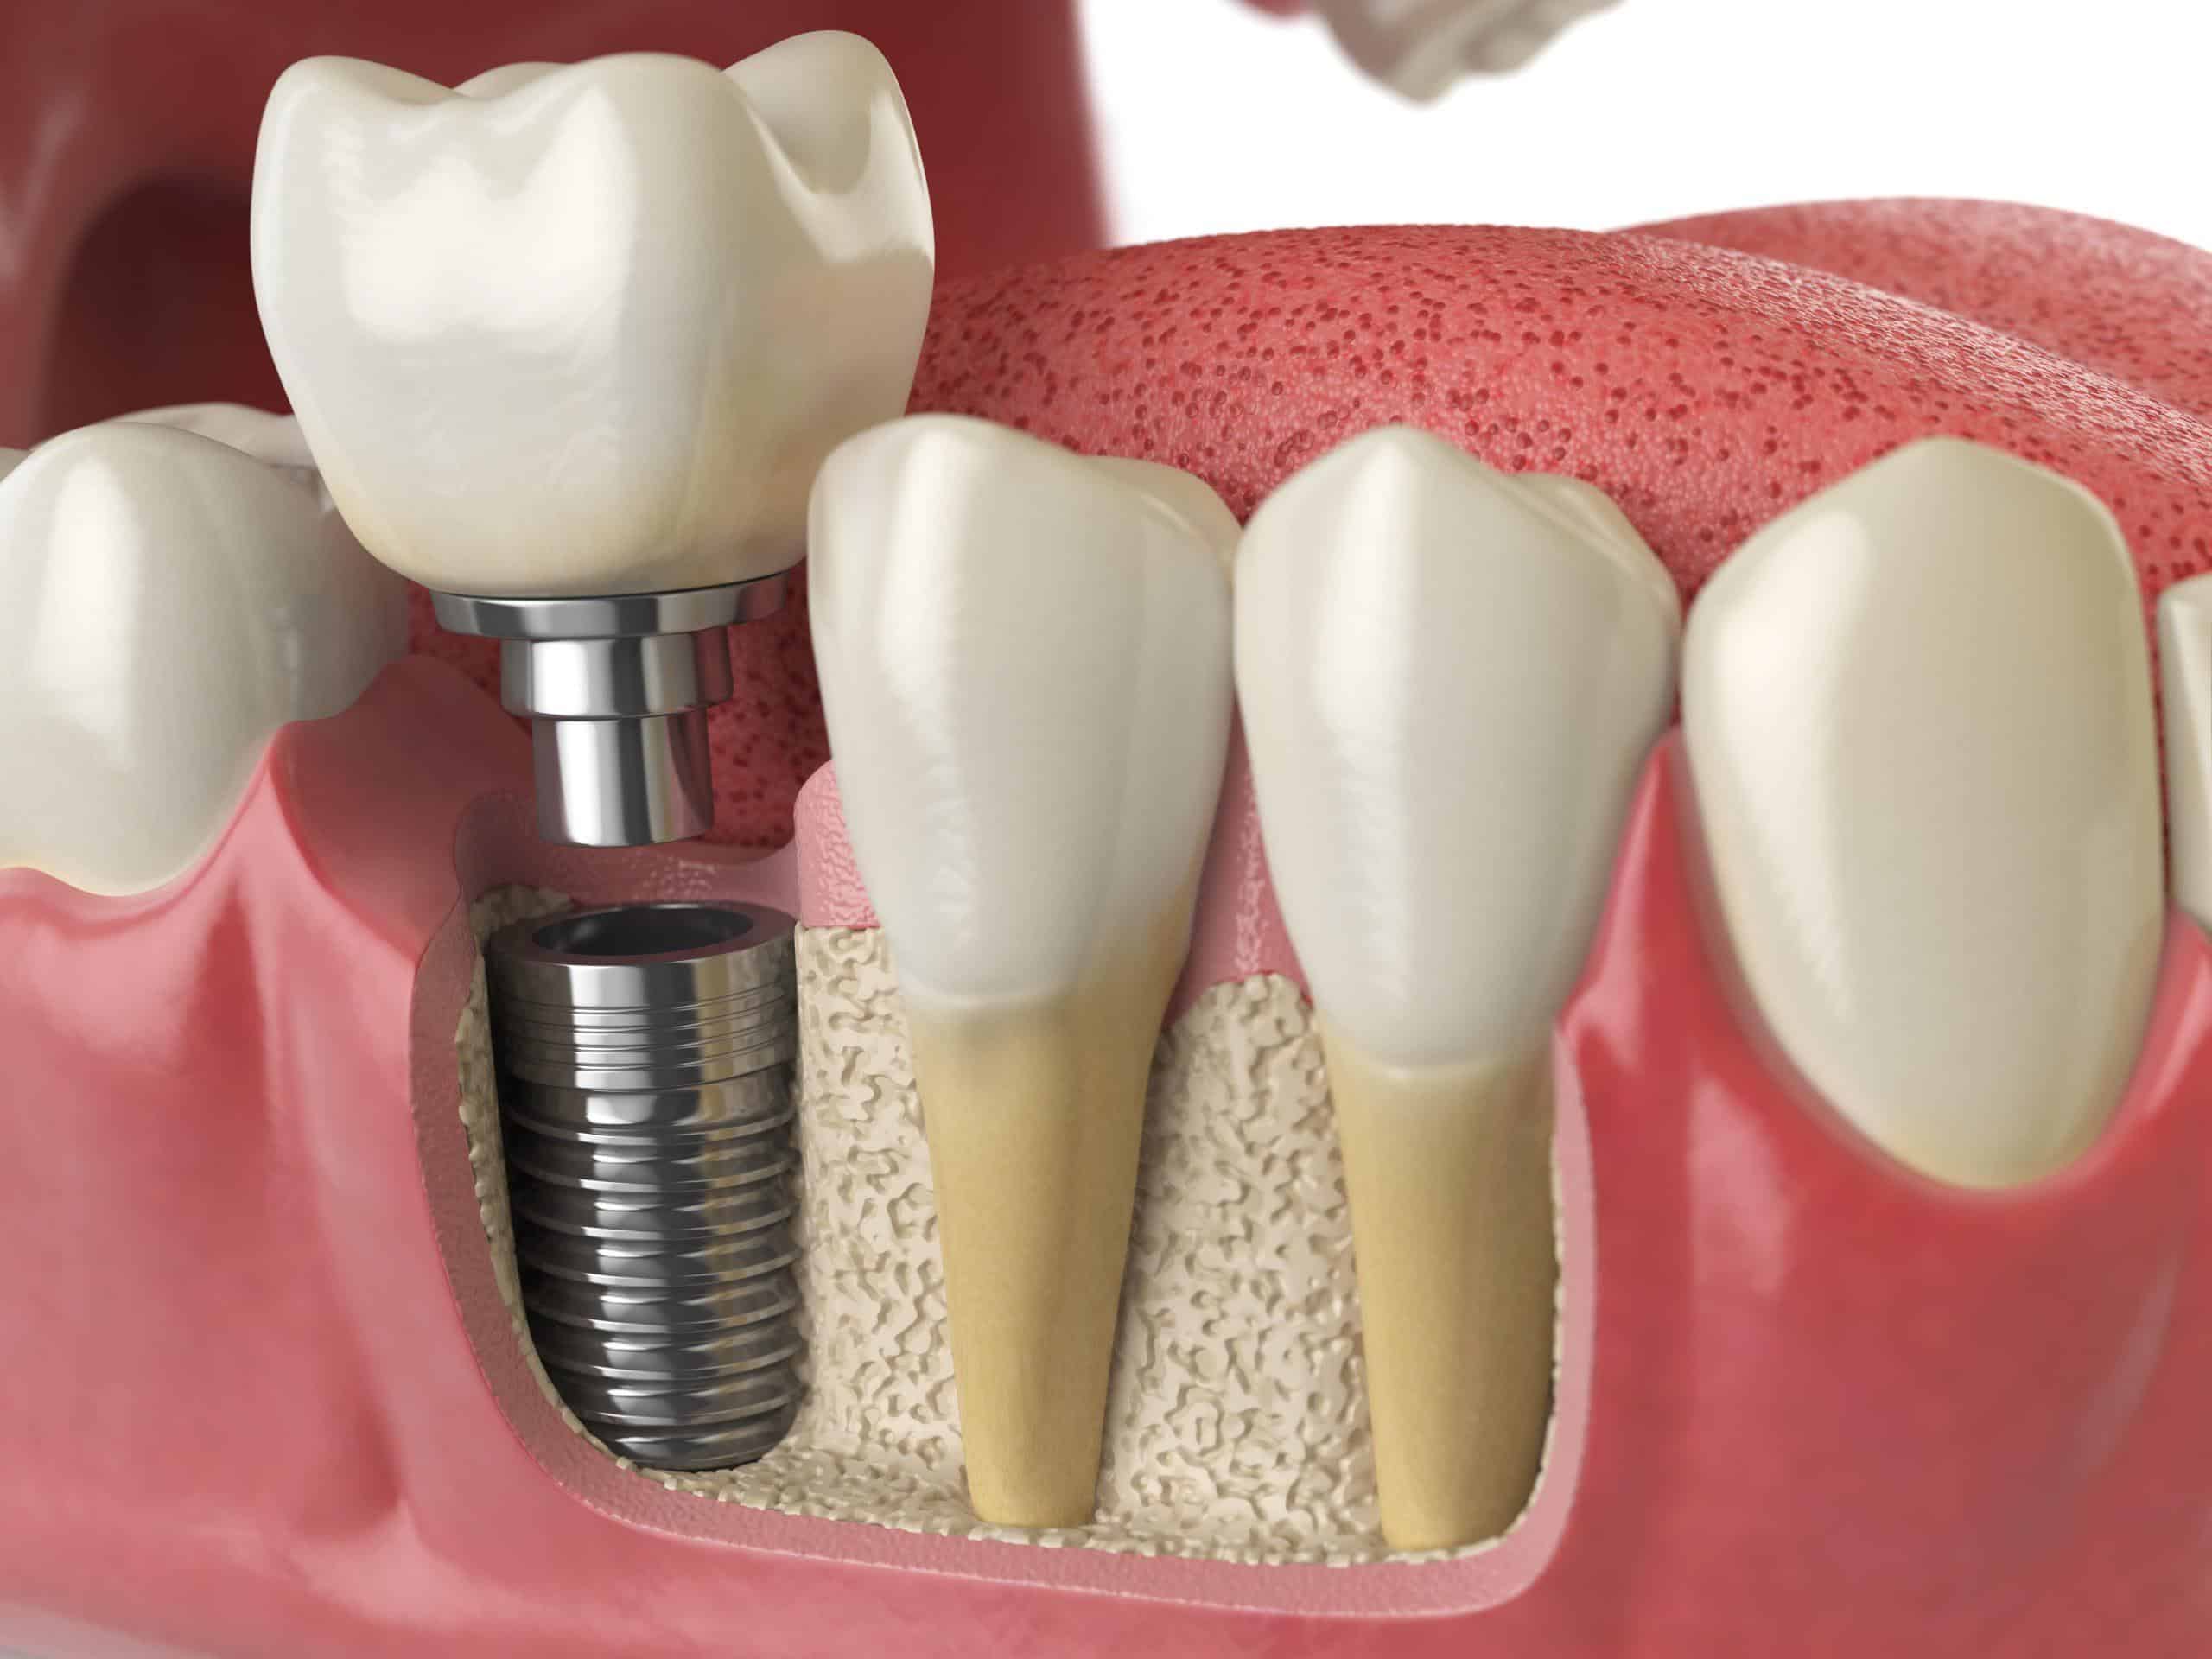 Dental Implant Procedure: What to Expect Before, During, and After